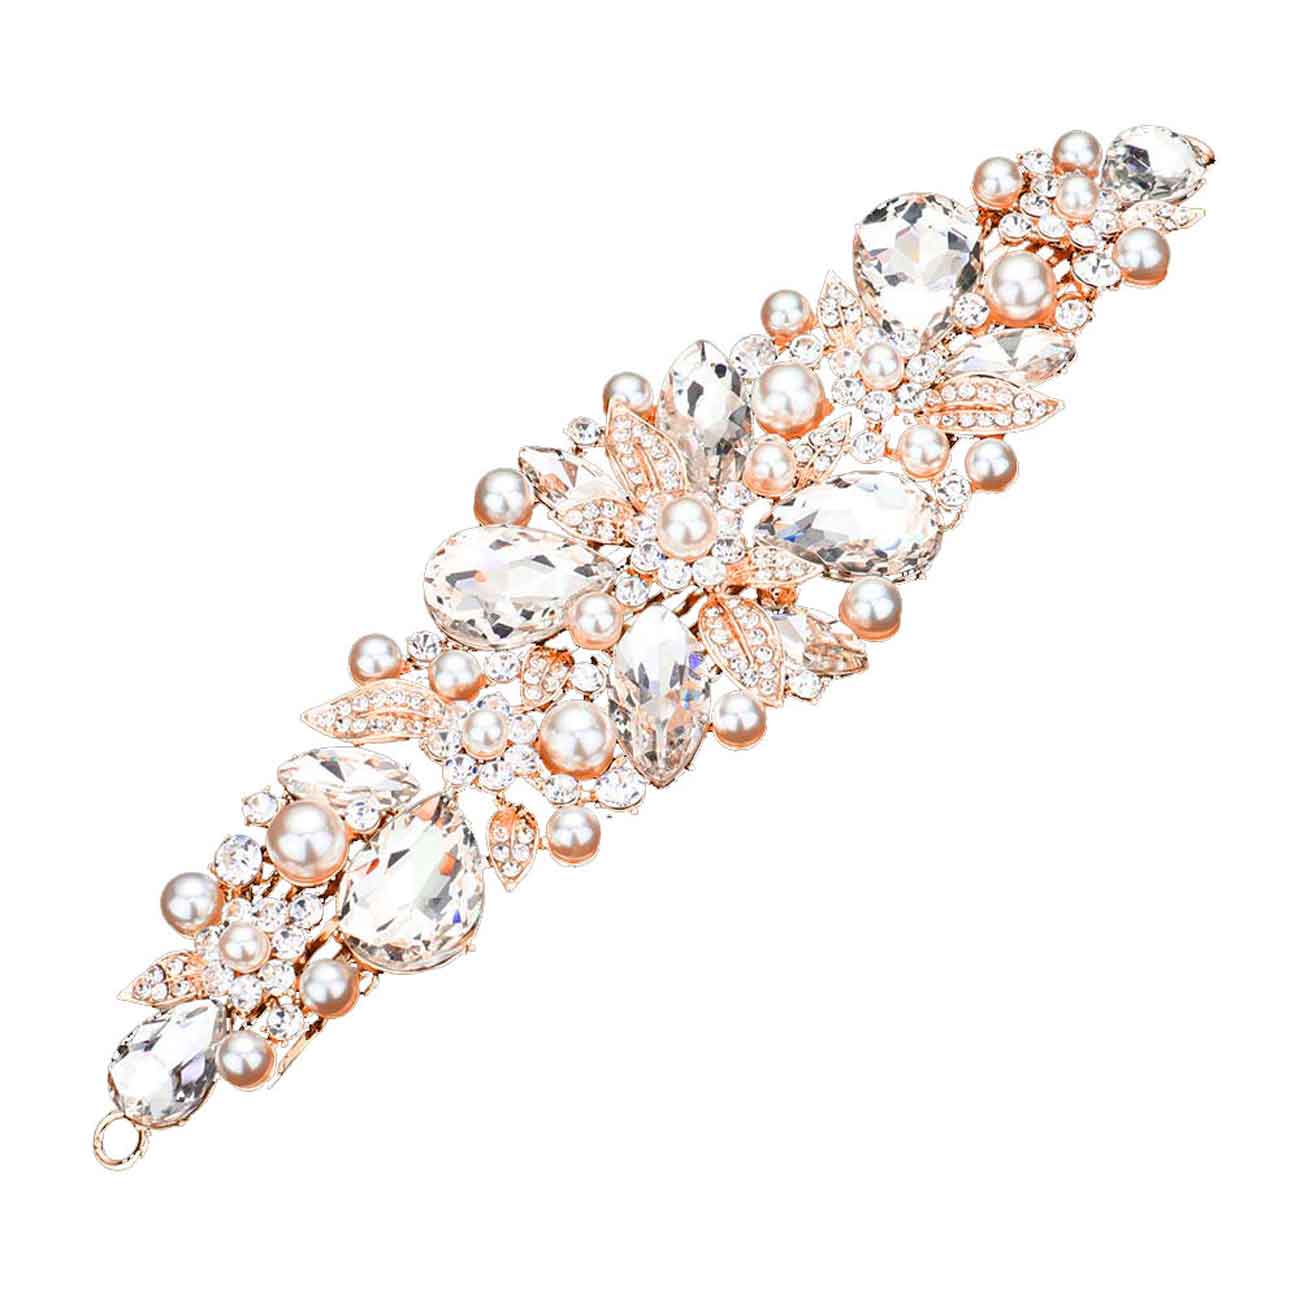 Rose Gold Pearl Multi Stone Embellished Flower Leaf Hair Comb, Perfect for adding just the right amount of shimmer & shine, will add a touch of class, beauty and style to your wedding, prom, special events, embellished pearl stone to keep your hair sparkling all day & all night long. The elegant design will enhance your beauty, attracting everyone's attention and transforming you into a bright star to wear with this hair comb.